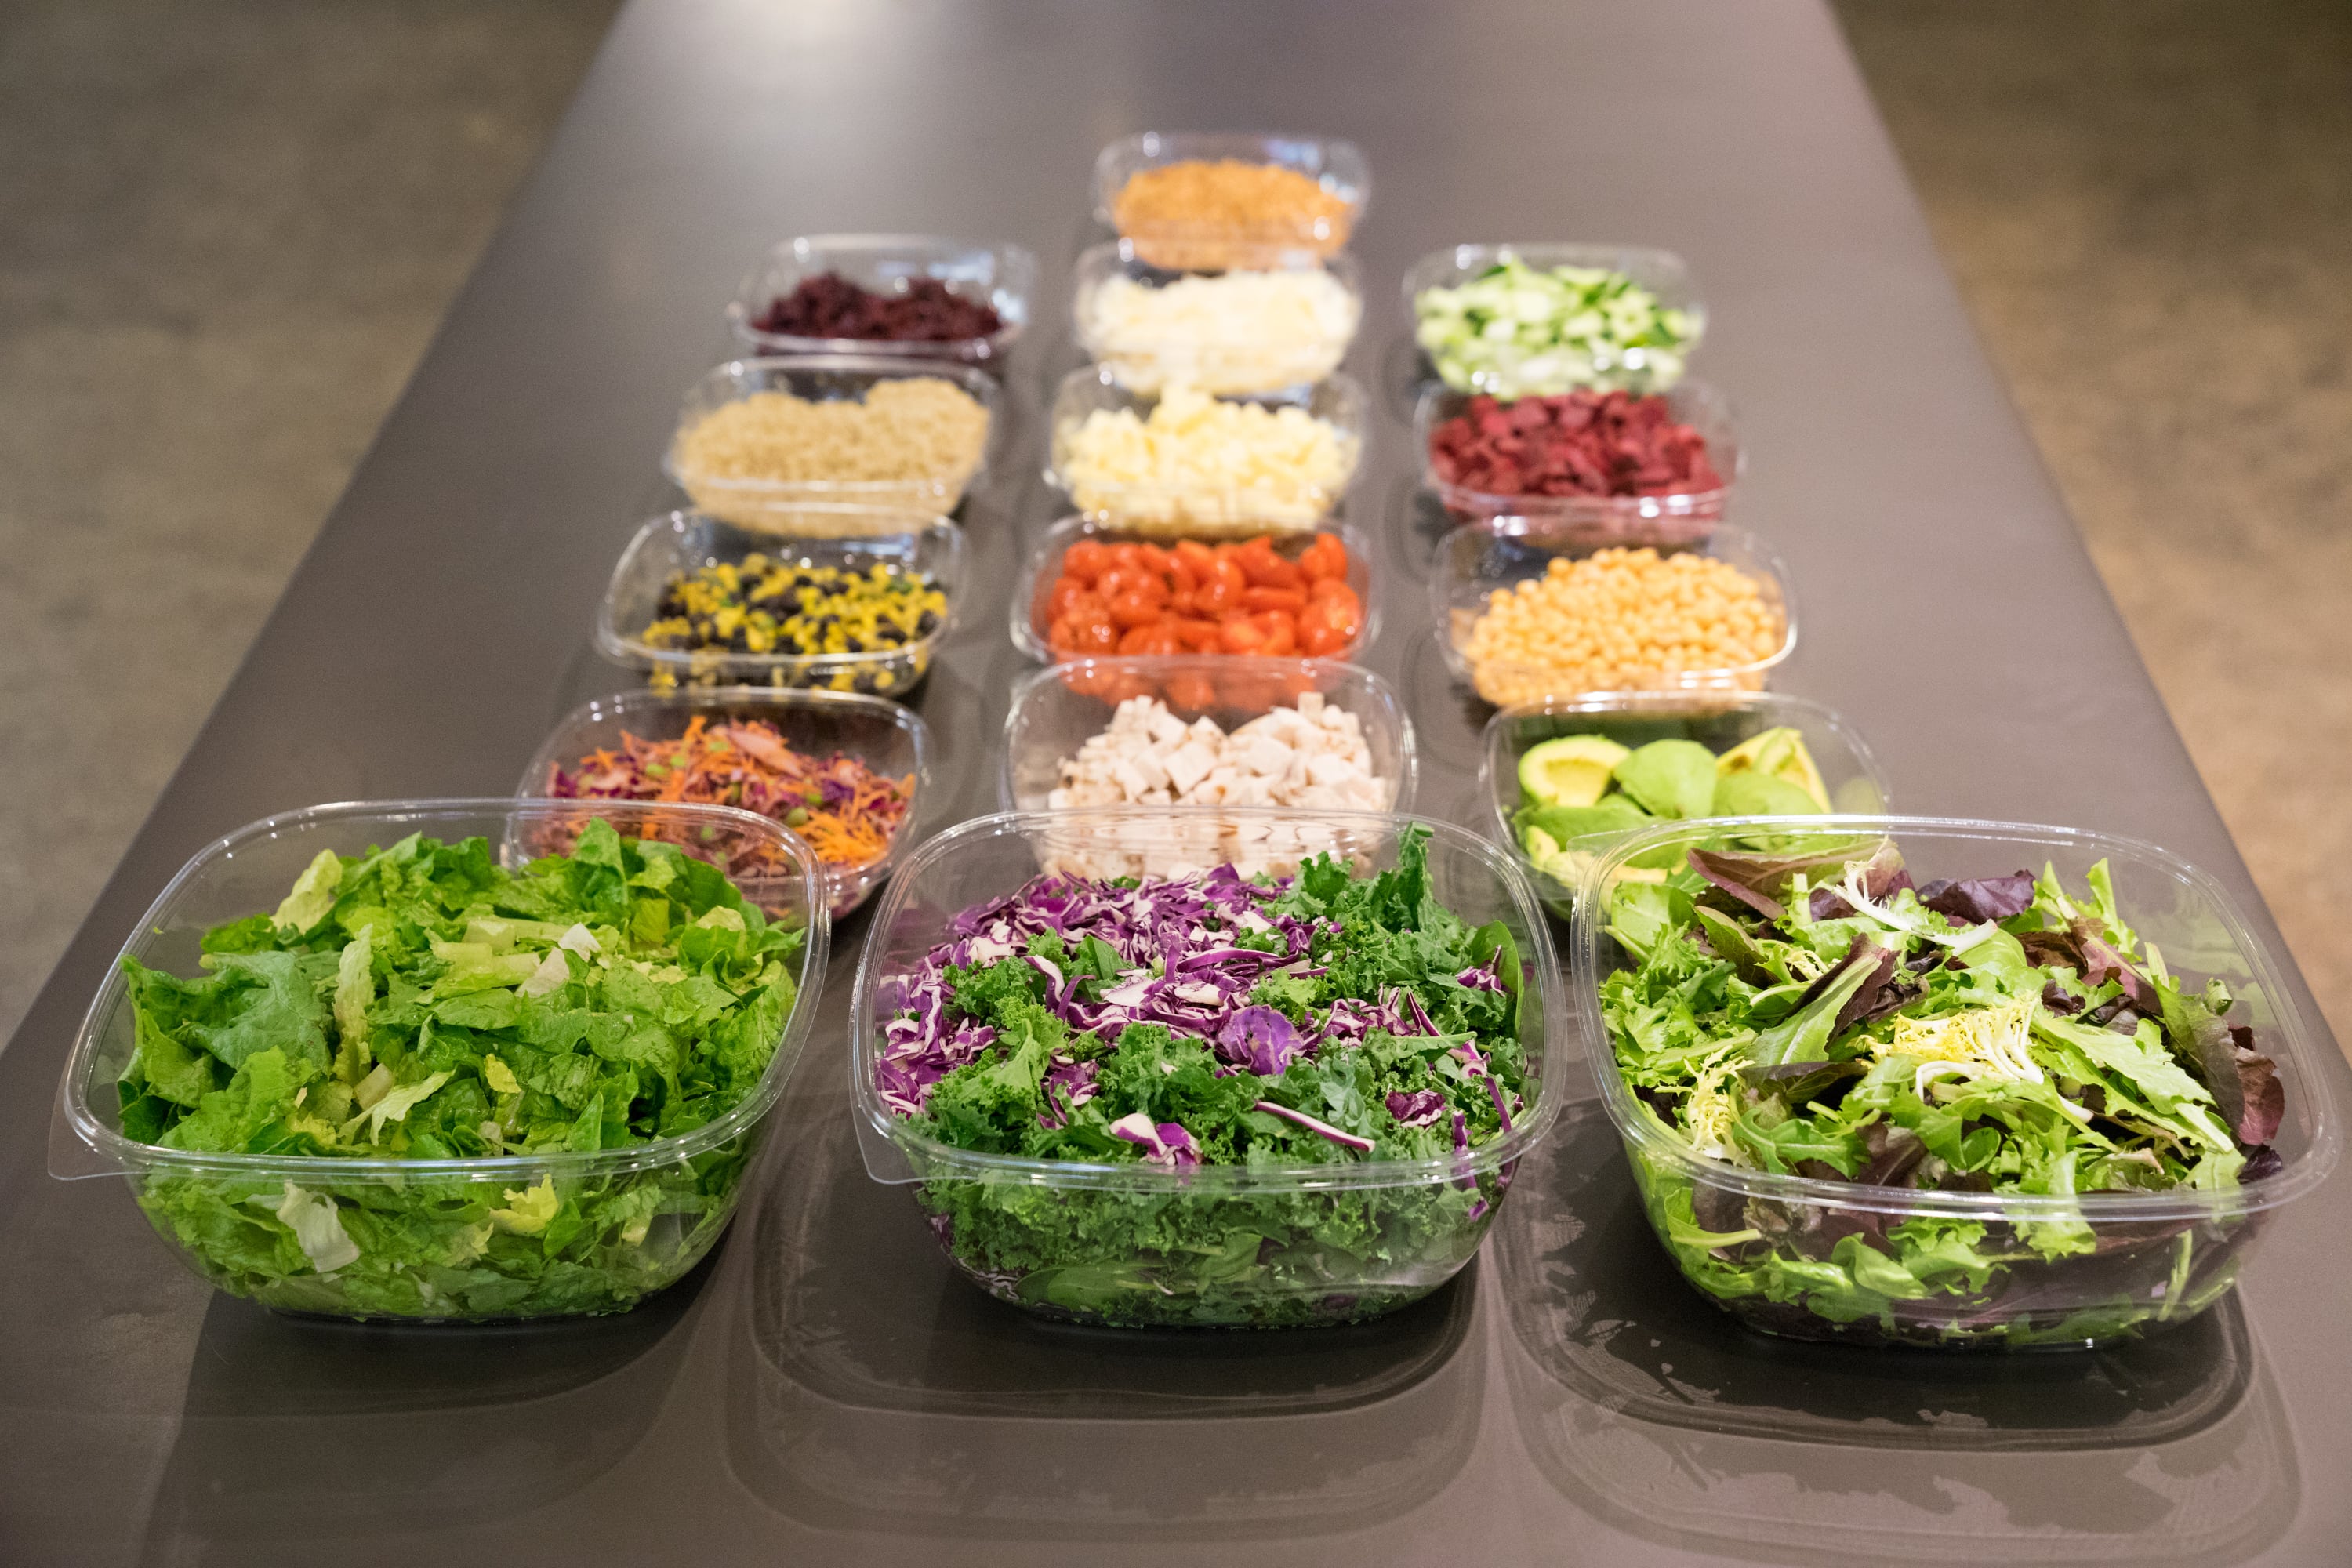 The best healthy restaurants in Chicago also do catering.